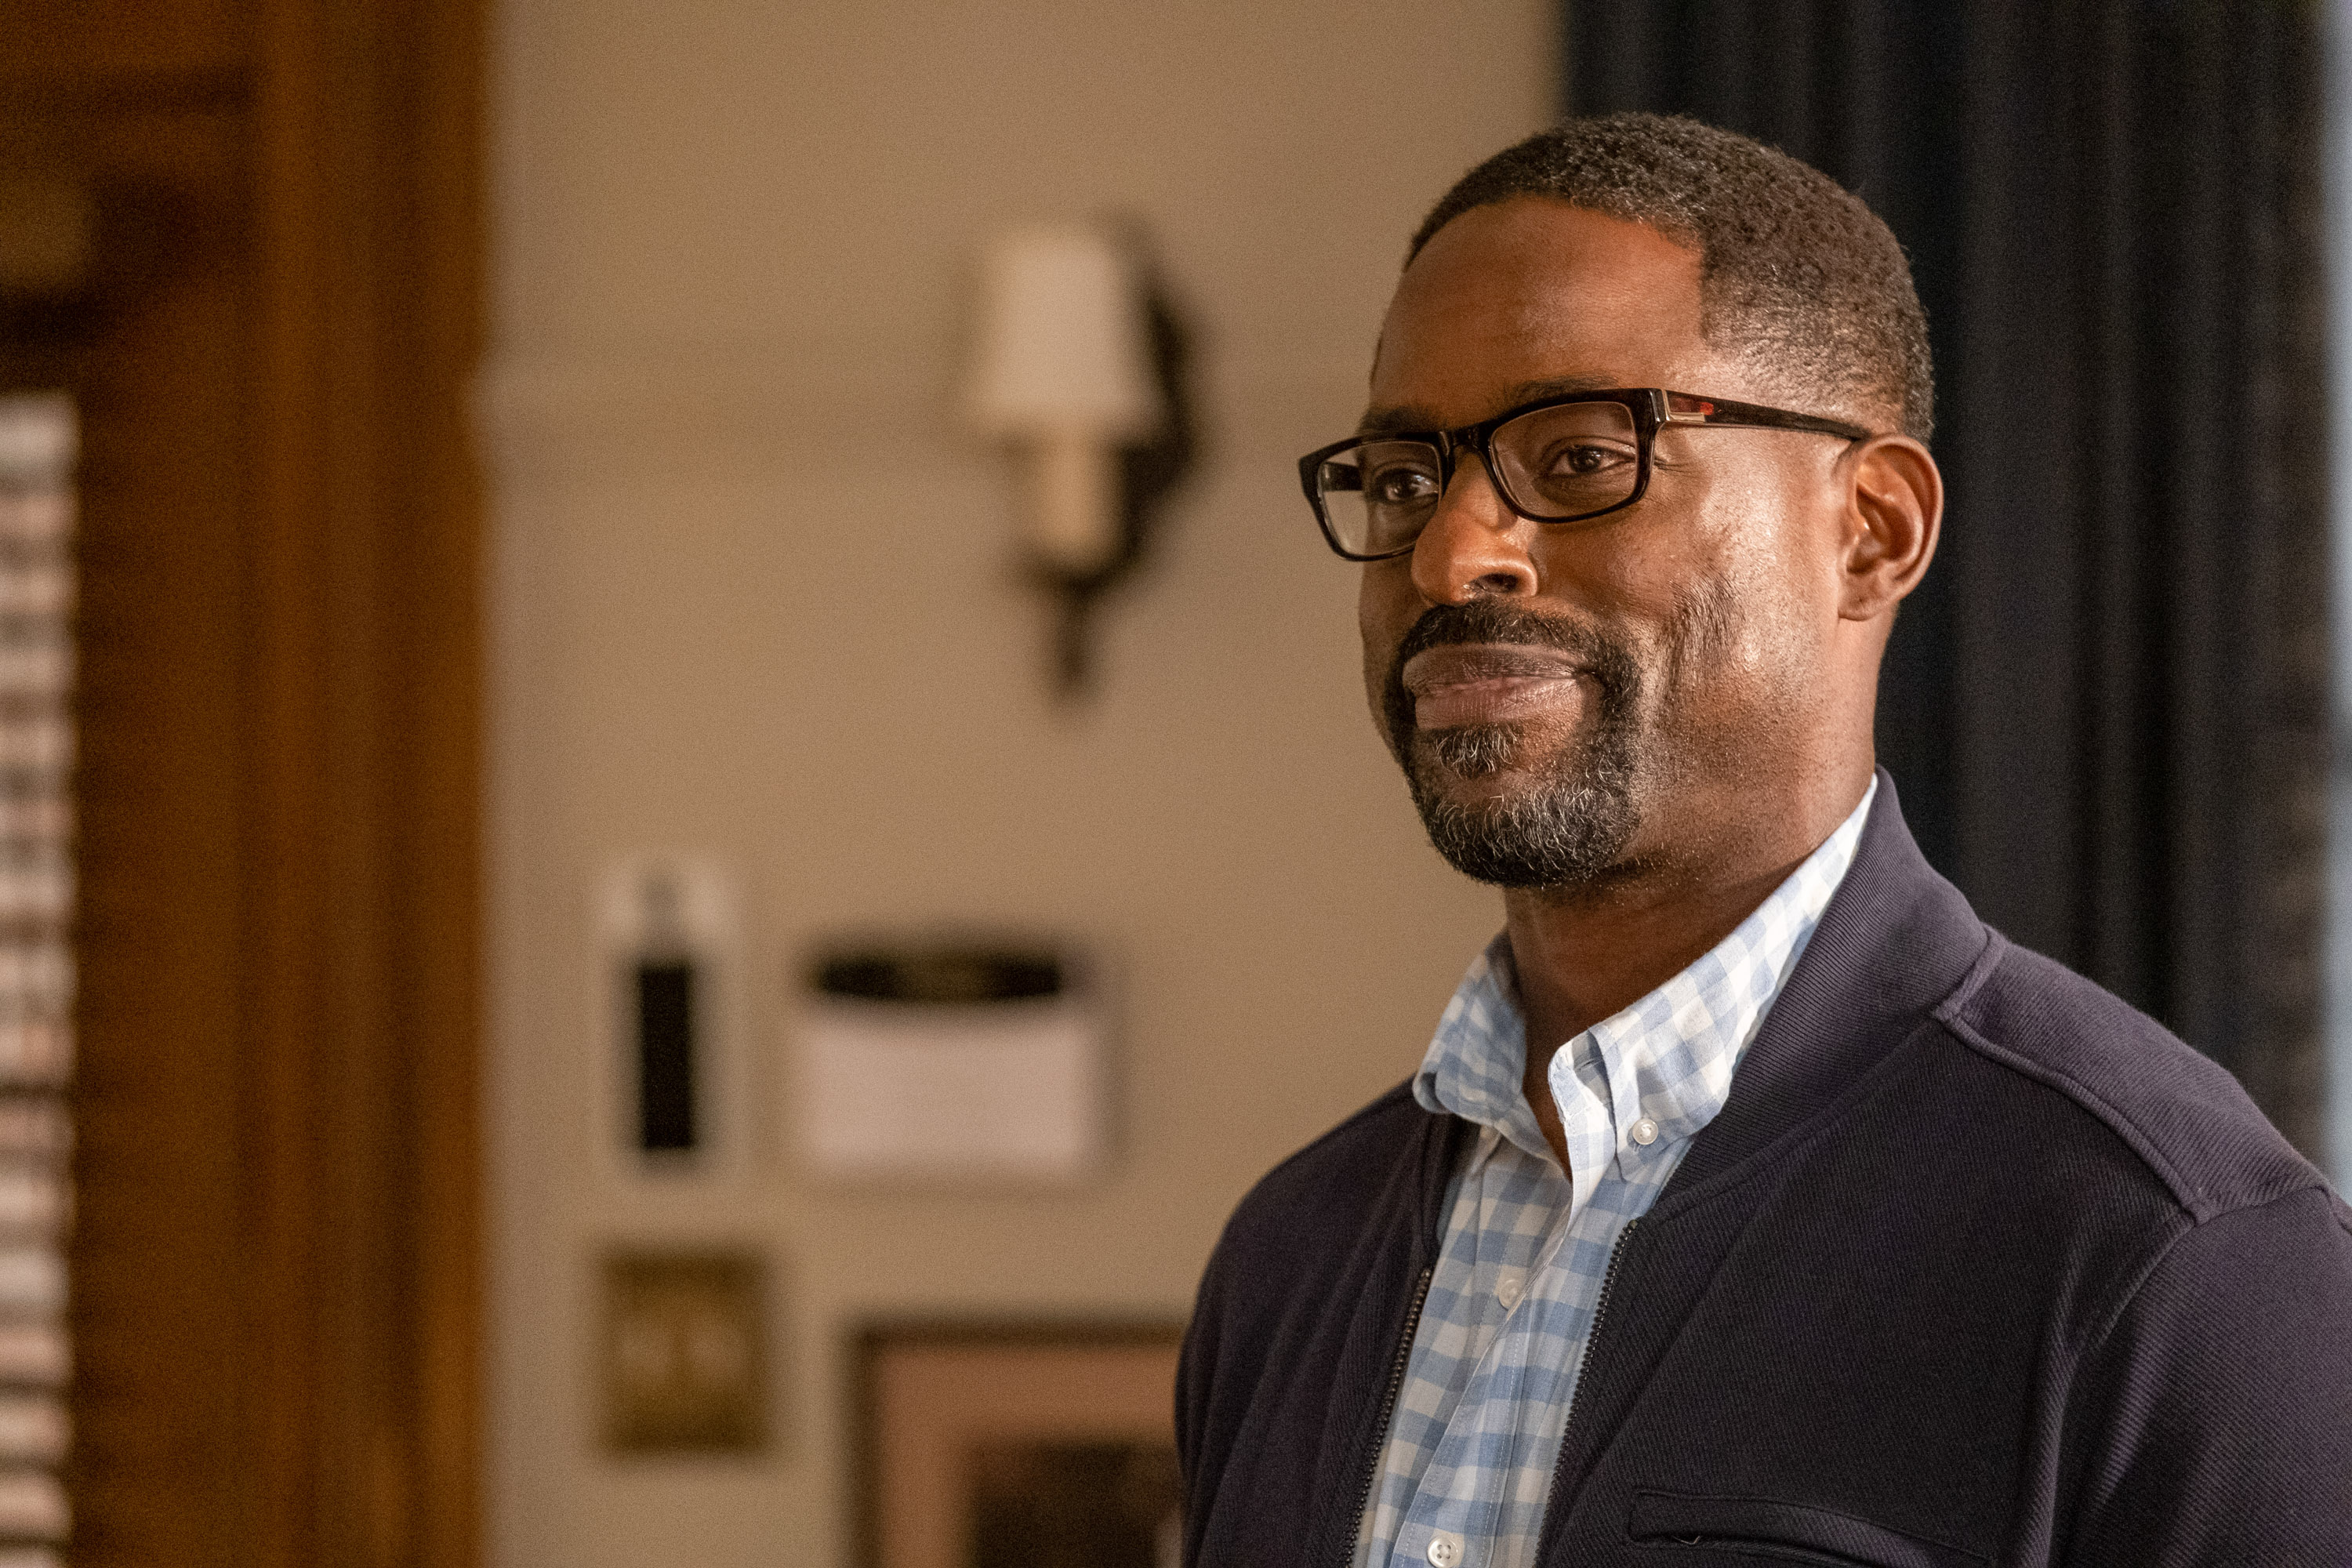 'This Is Us' star Sterling K. Brown, in character as Randall Pearson, wears a dark blue jacket over a light blue plaid button-up shirt and black-framed glasses.